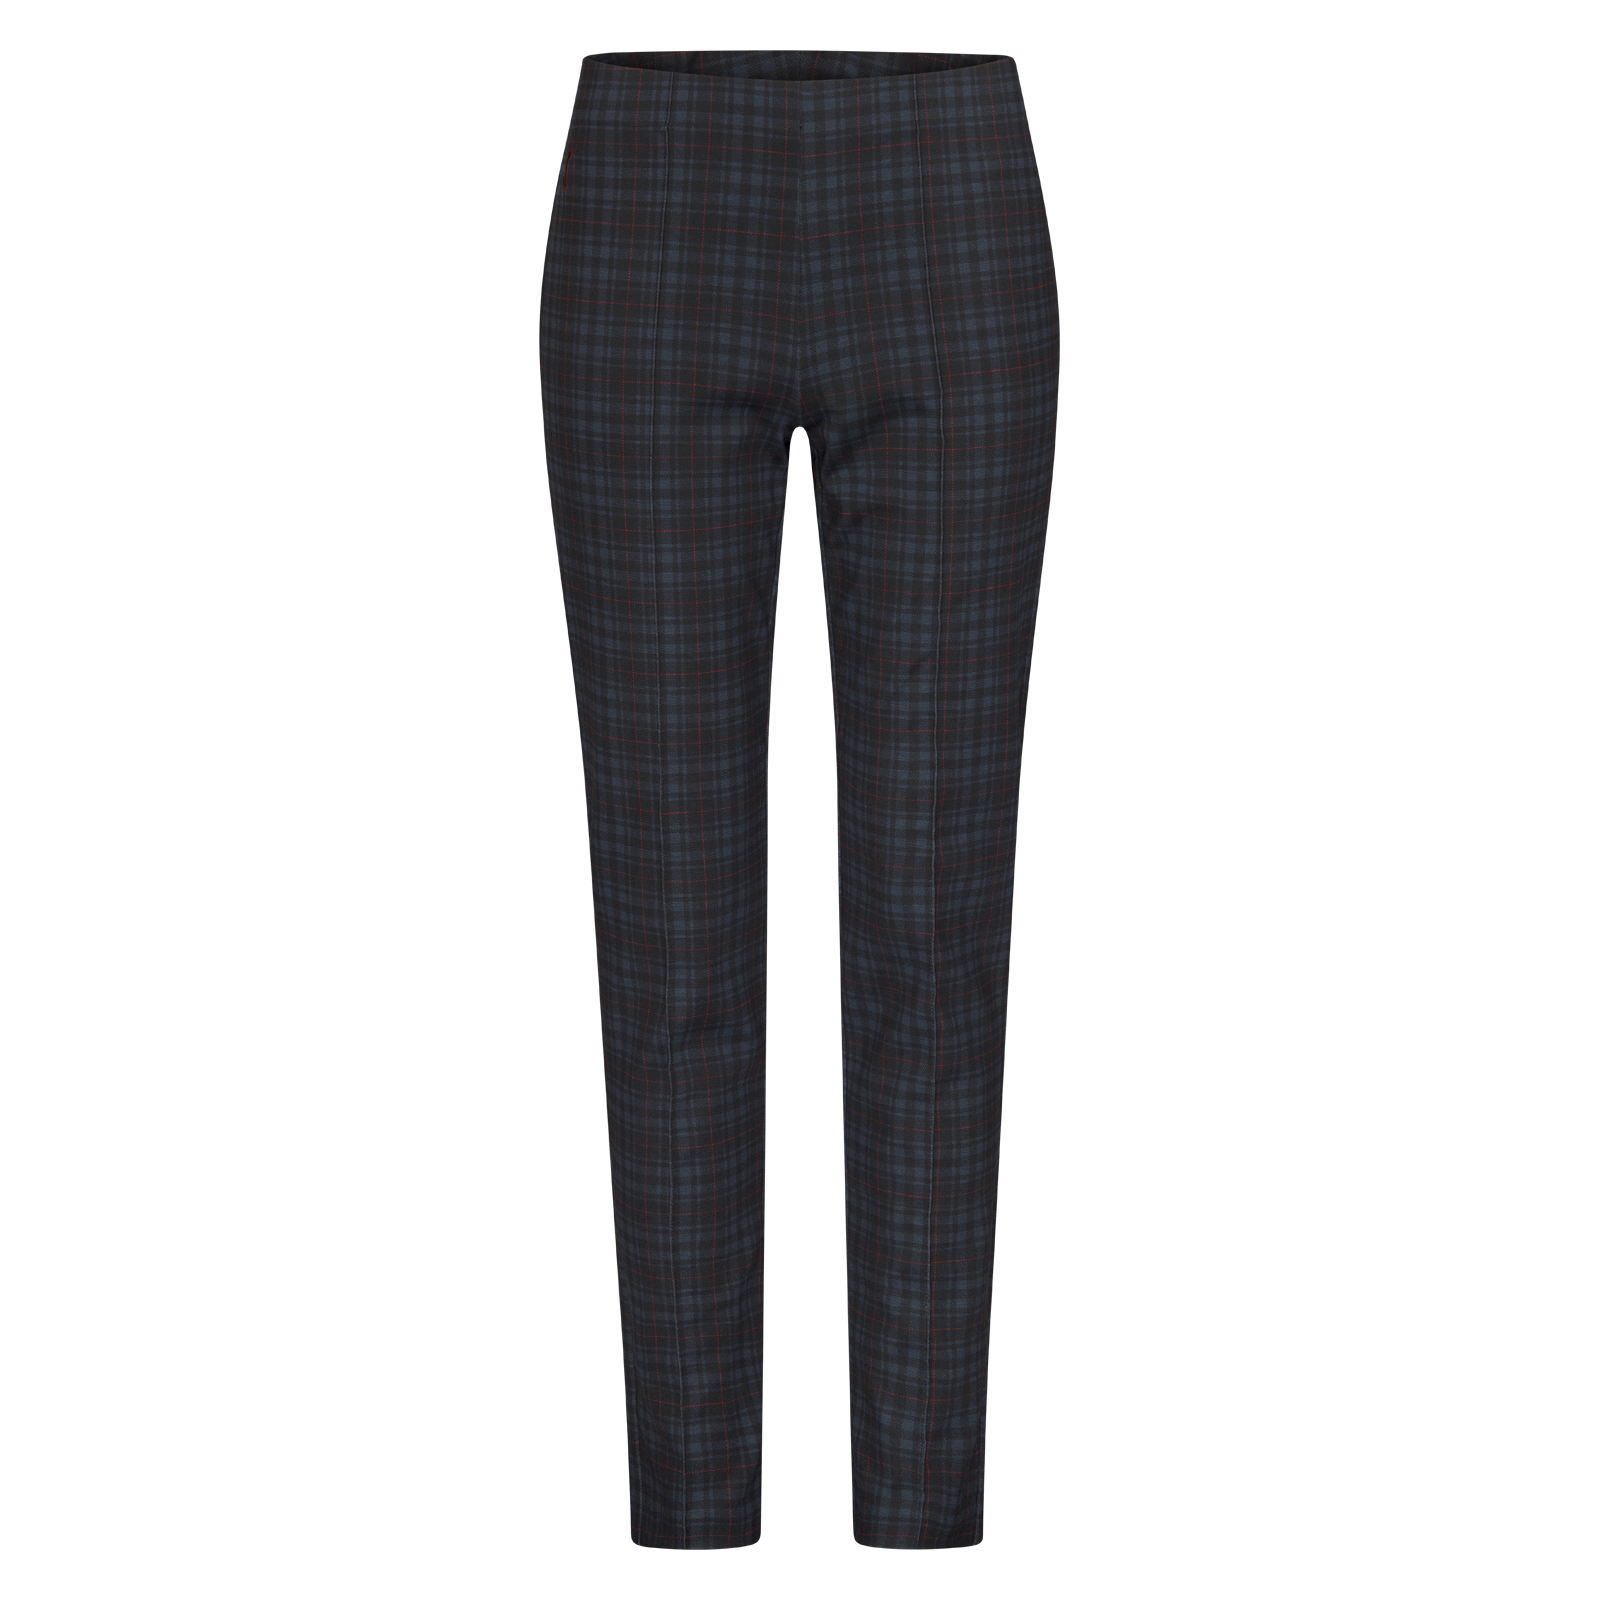 Ladies' slim fit stretch golf trousers in an attractive check pattern with rayon